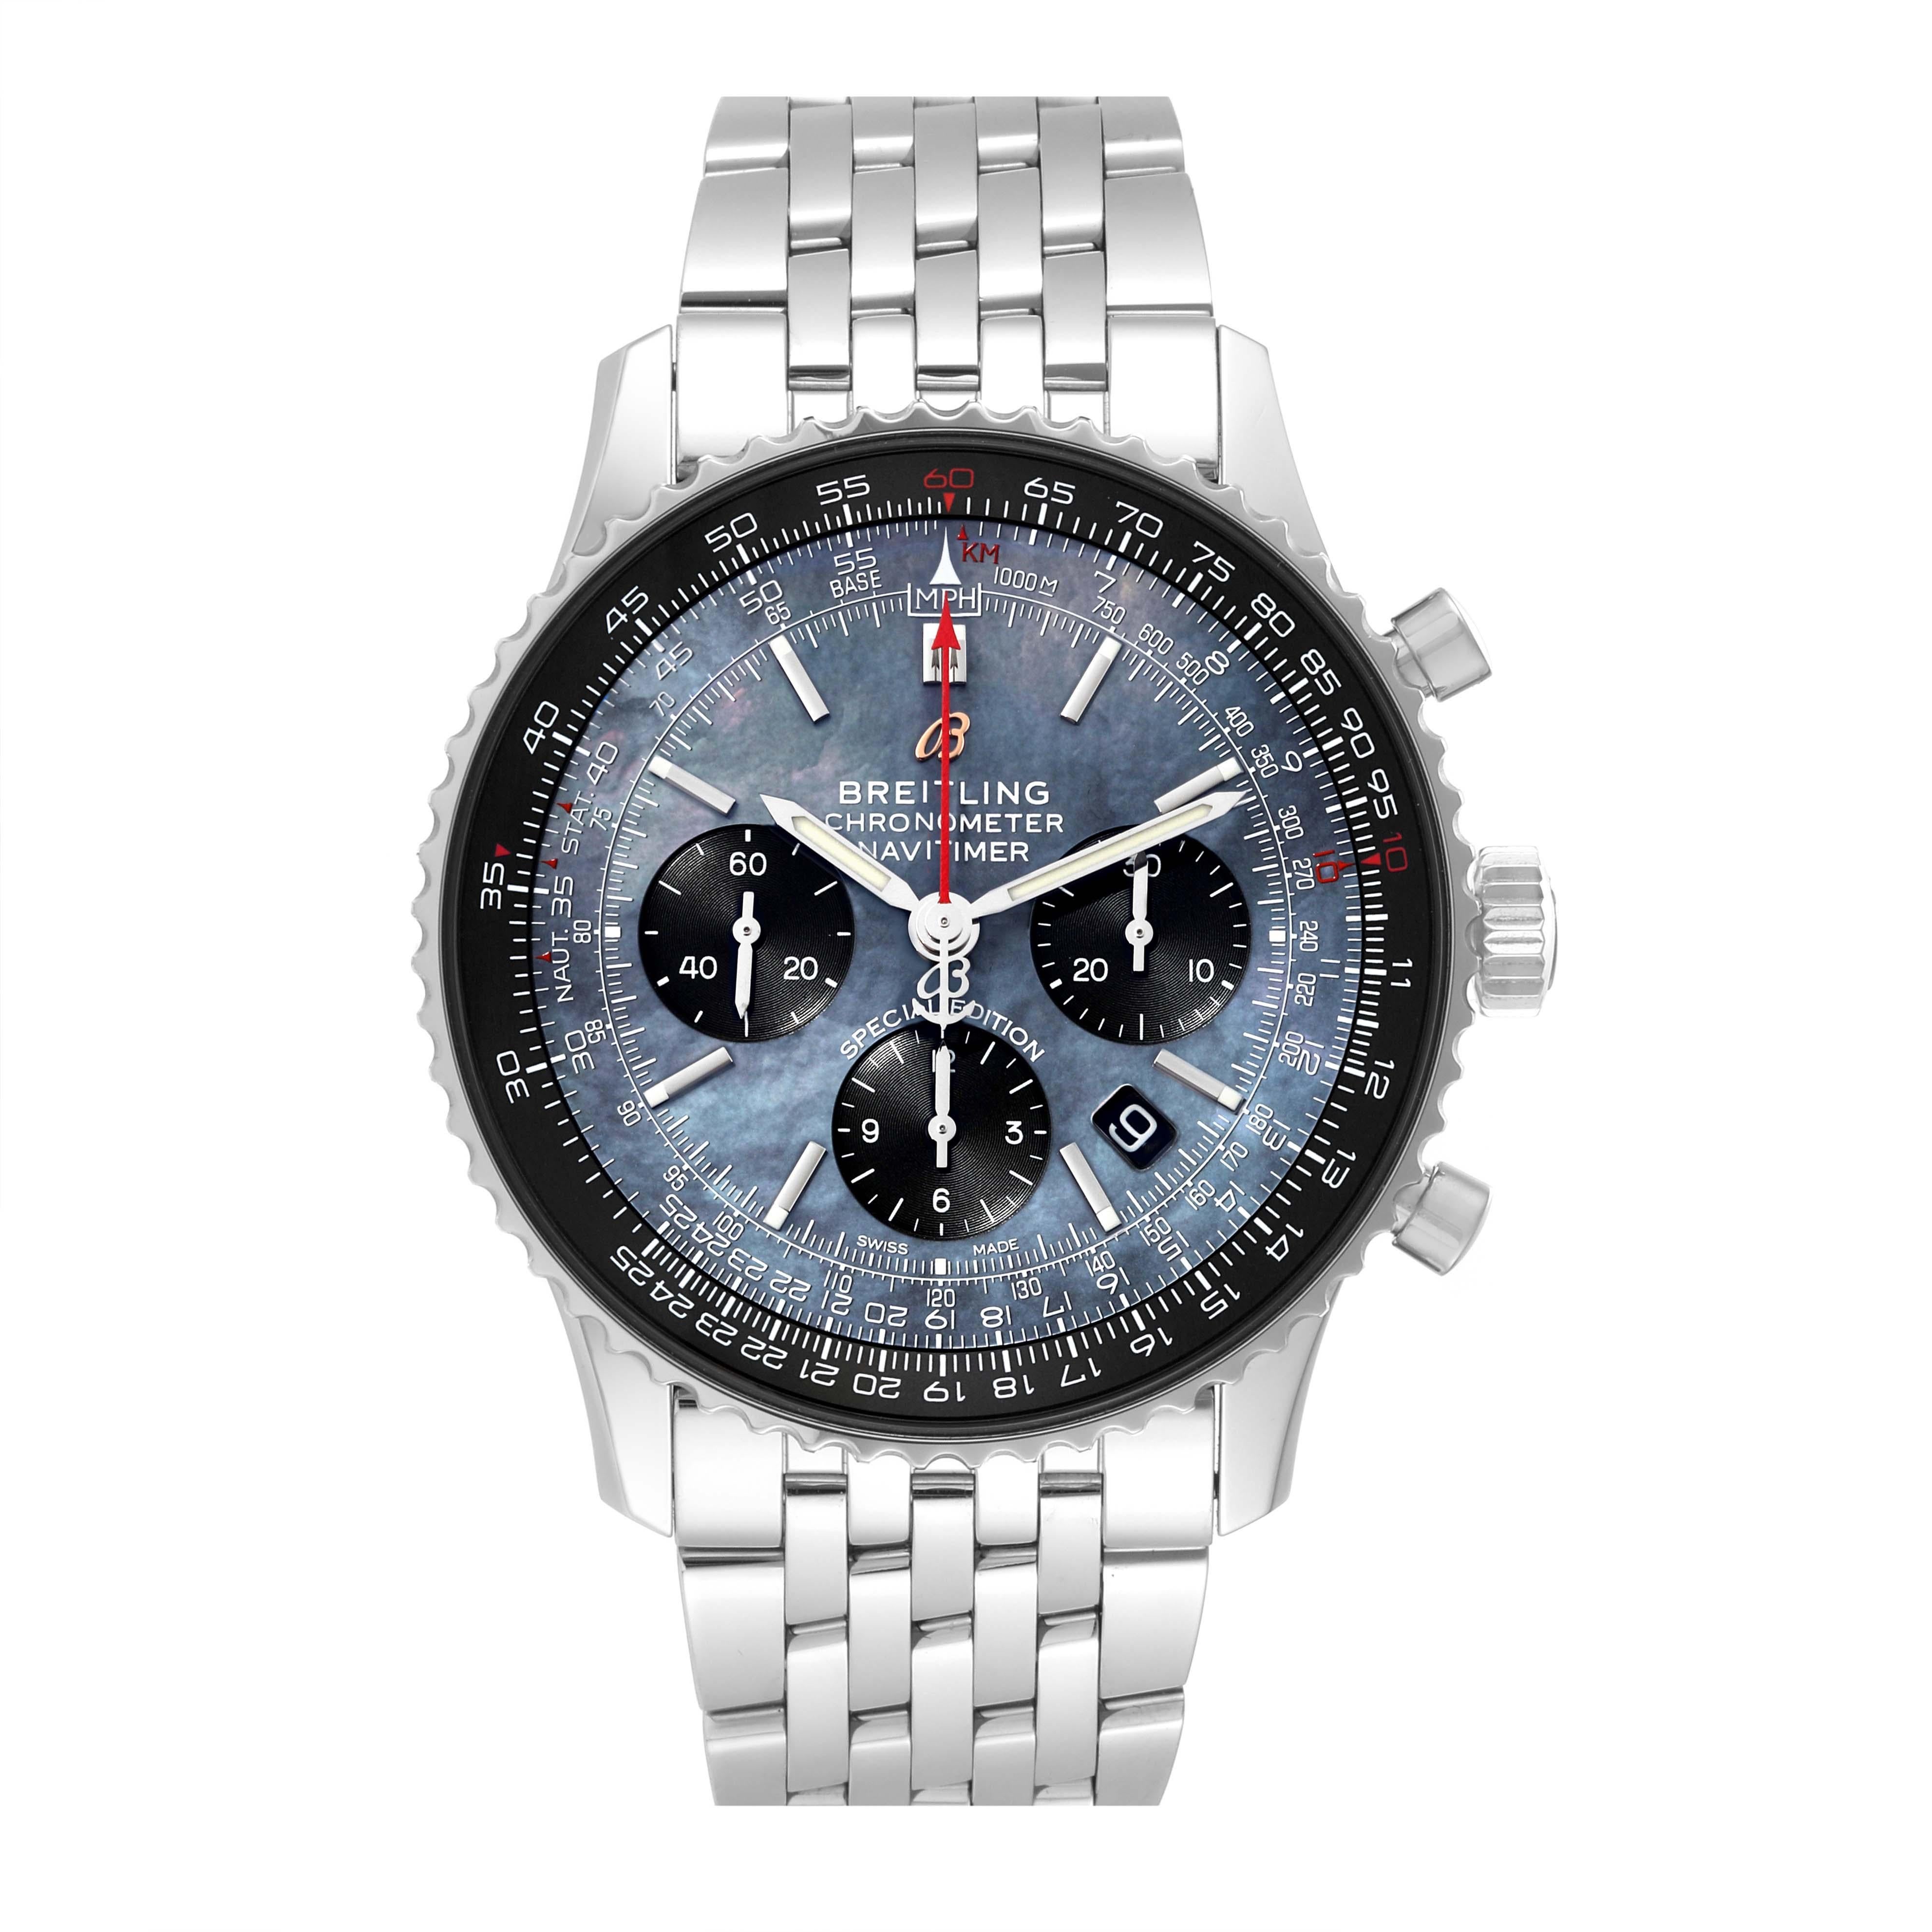 Breitling Navitimer 01 Blue Mother of Pearl Dial Steel Mens Watch AB0121. Self-winding automatic officially certified chronometer movement. Chronograph function. Stainless steel case 43 mm in diameter. Case thickness 14.25 mm. Transparent exhibition